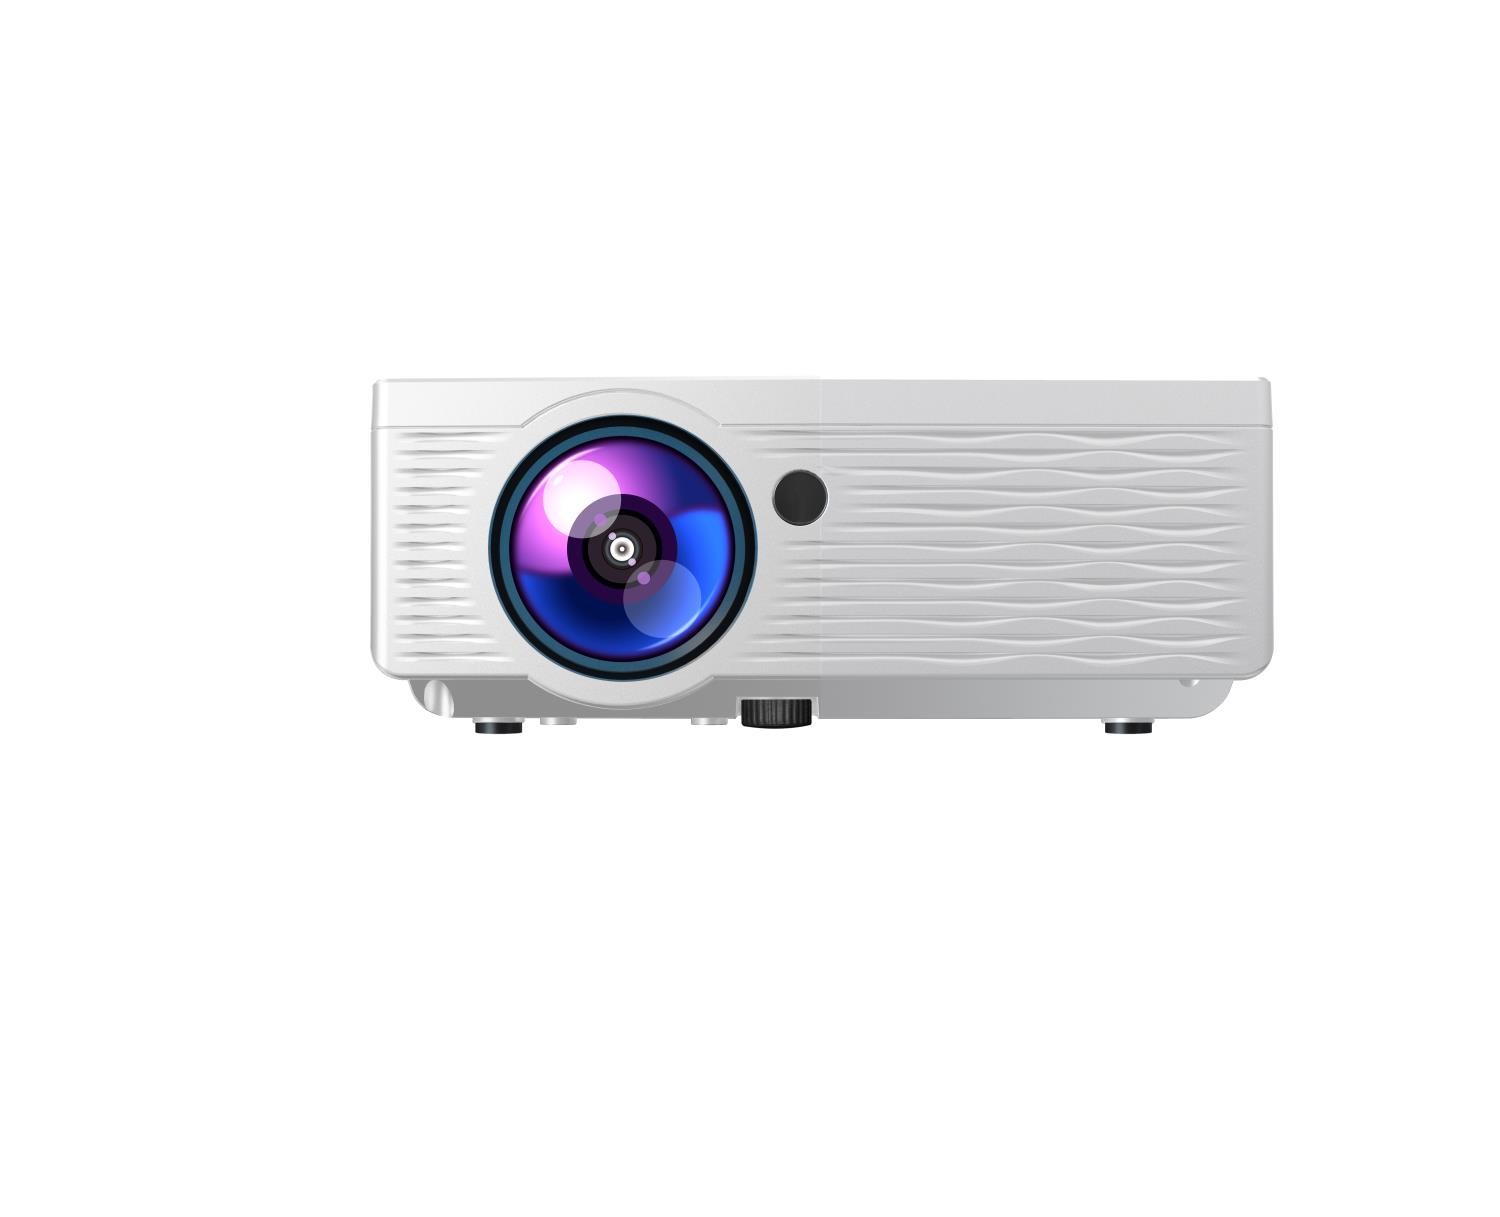 Hot A2001 laser dlp smart mini phone projector mobile 3d projection Digital home lcd projector 6000 lumens price